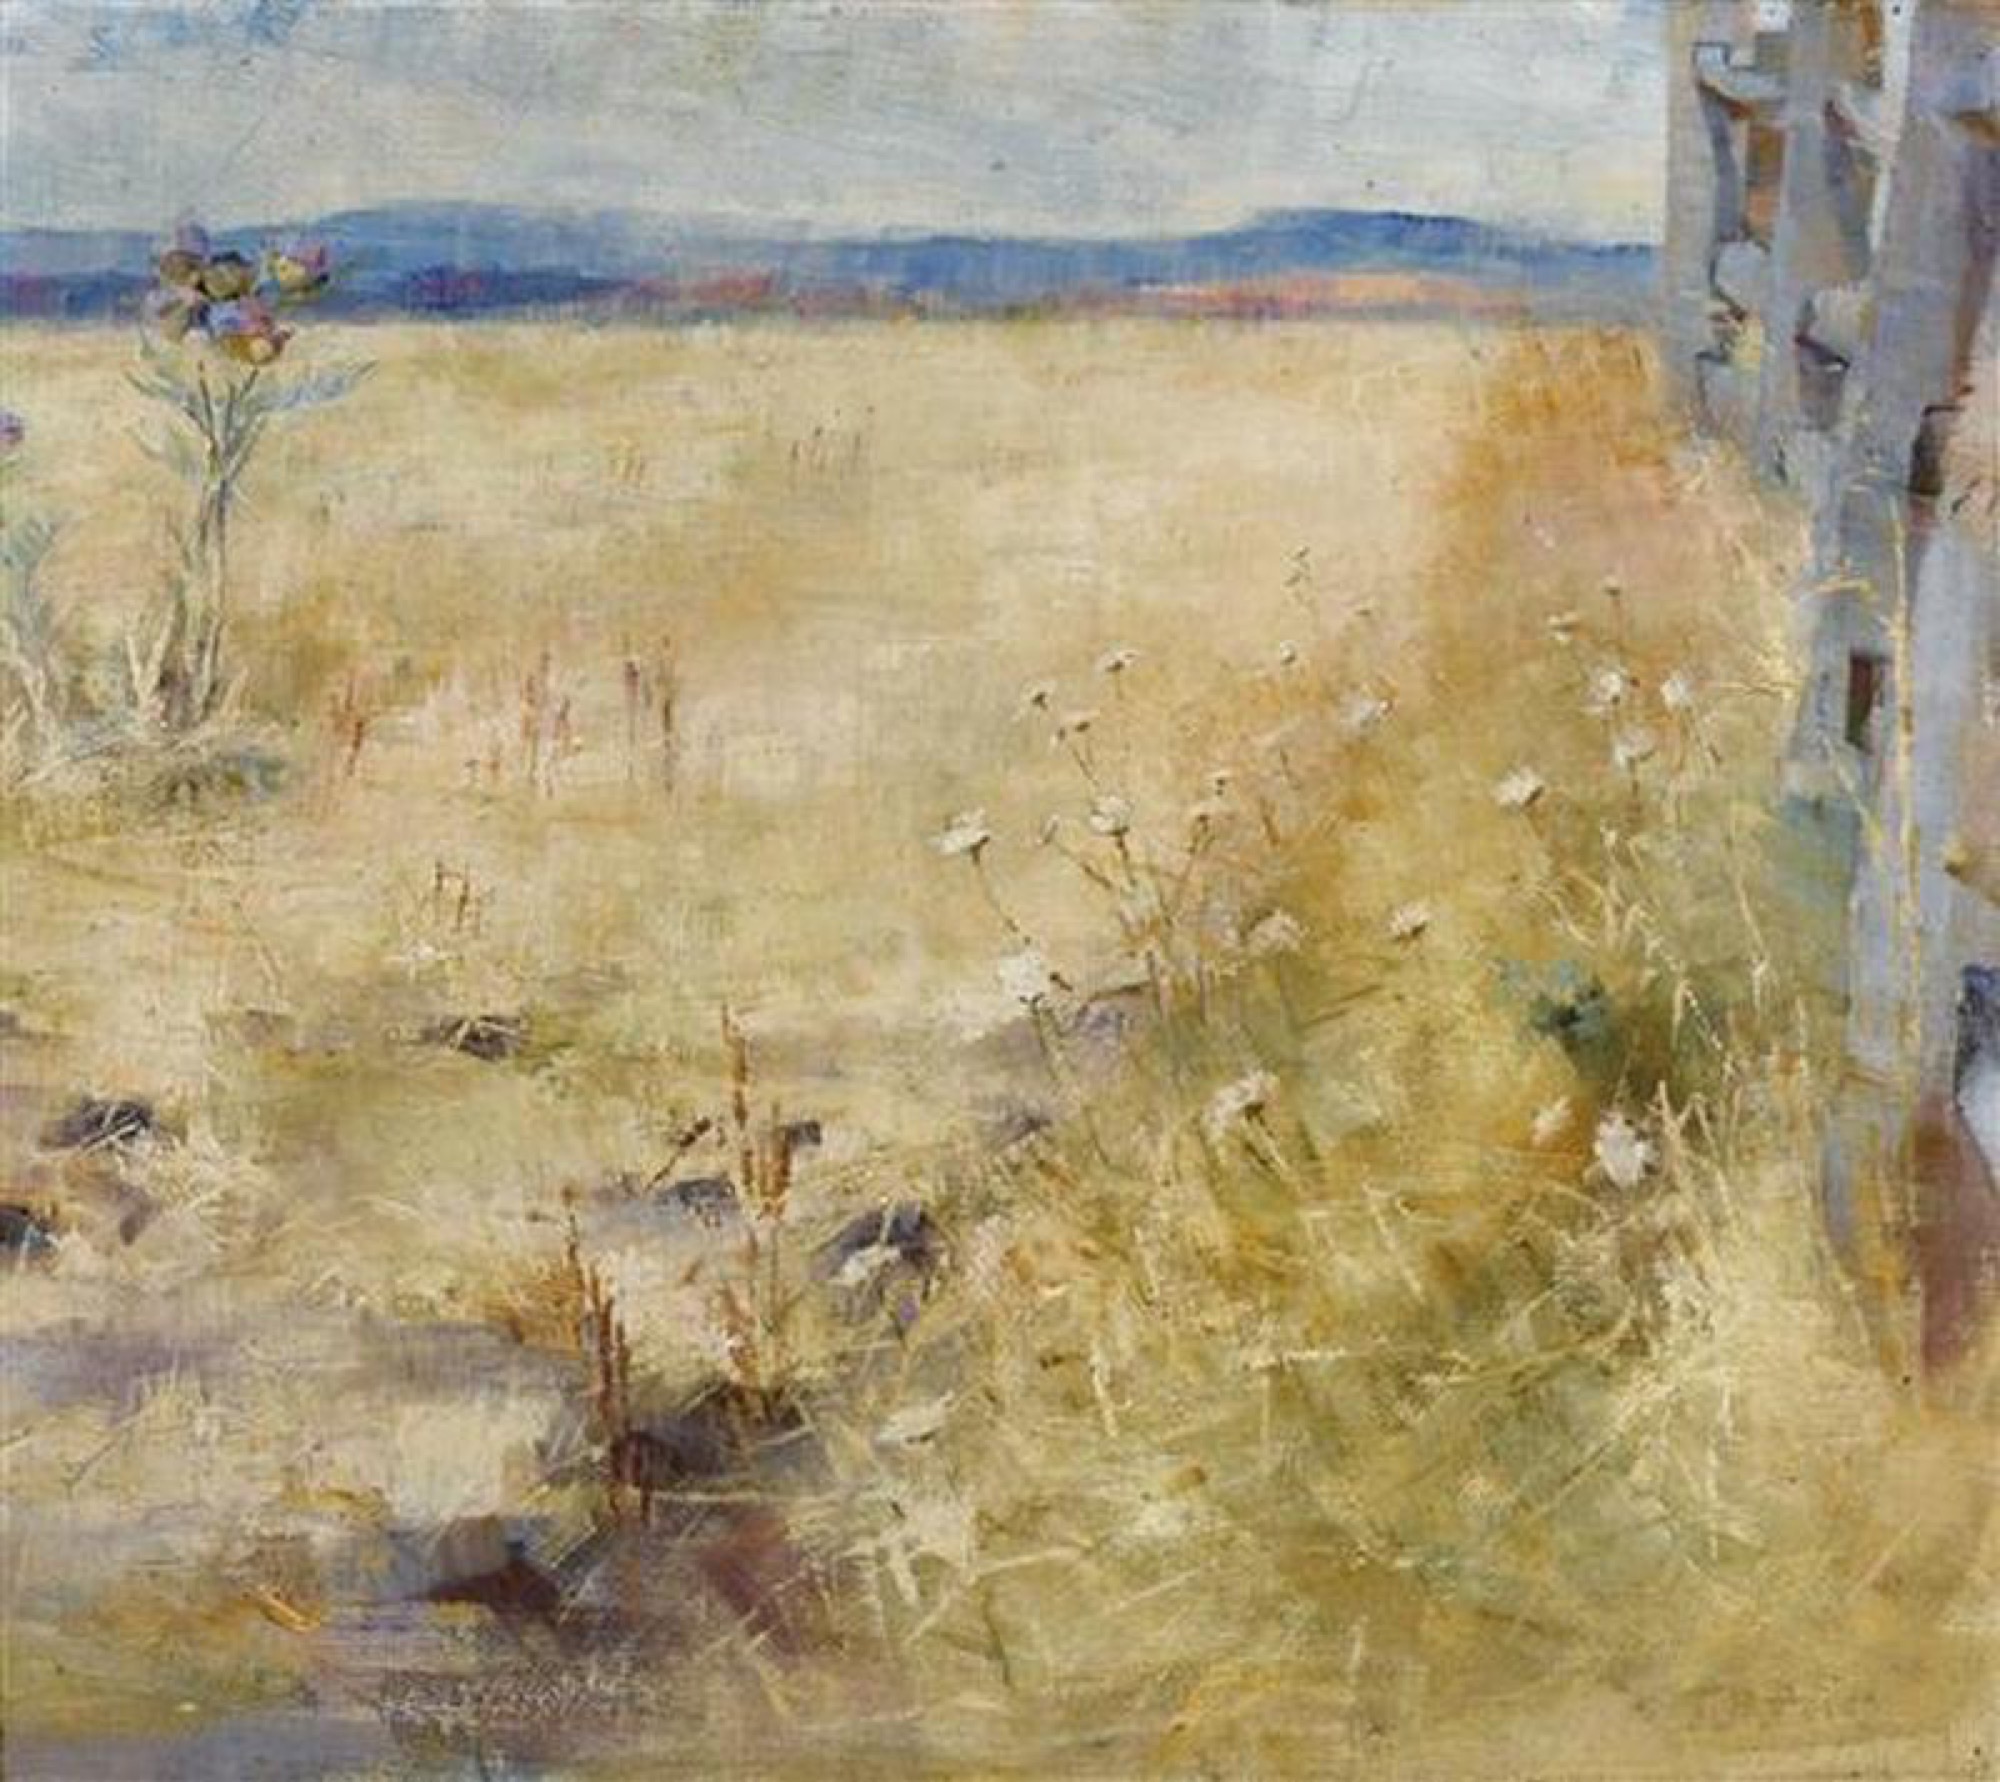 Jane Price, <em>Plough Land in Summer</em>, c. 1900. Oil on canvas. Private collection courtesy of Smith &amp; Singer Fine Art.